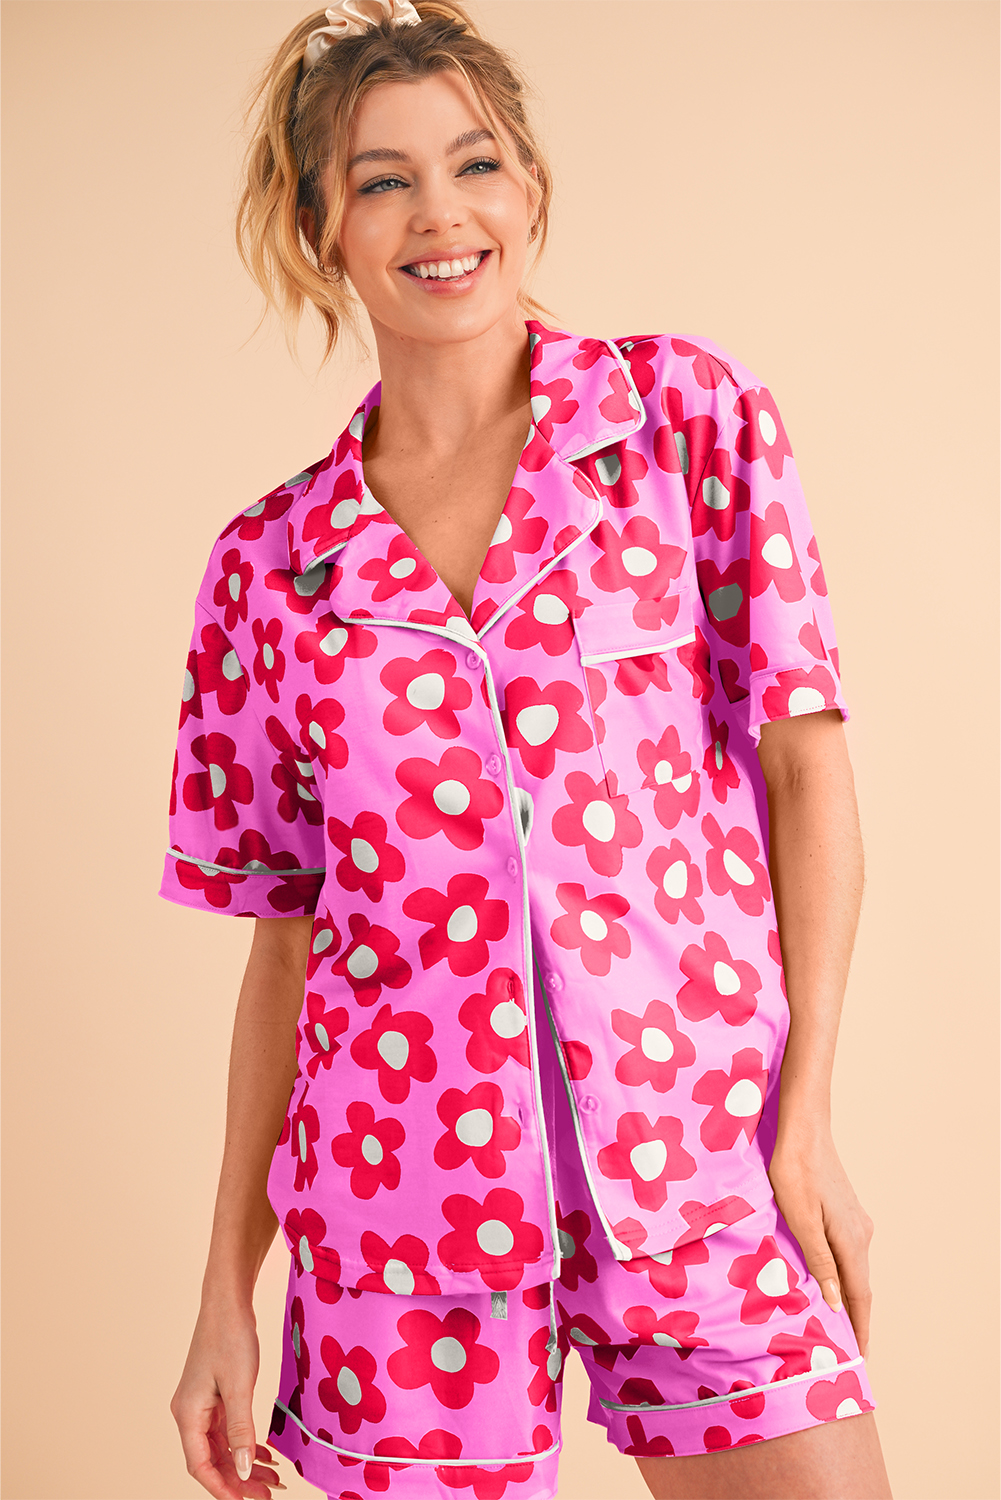 Shewin Wholesale Clothing Pink Flower Print Buttoned Shirt and Drawstring Waist PAJAMA Set